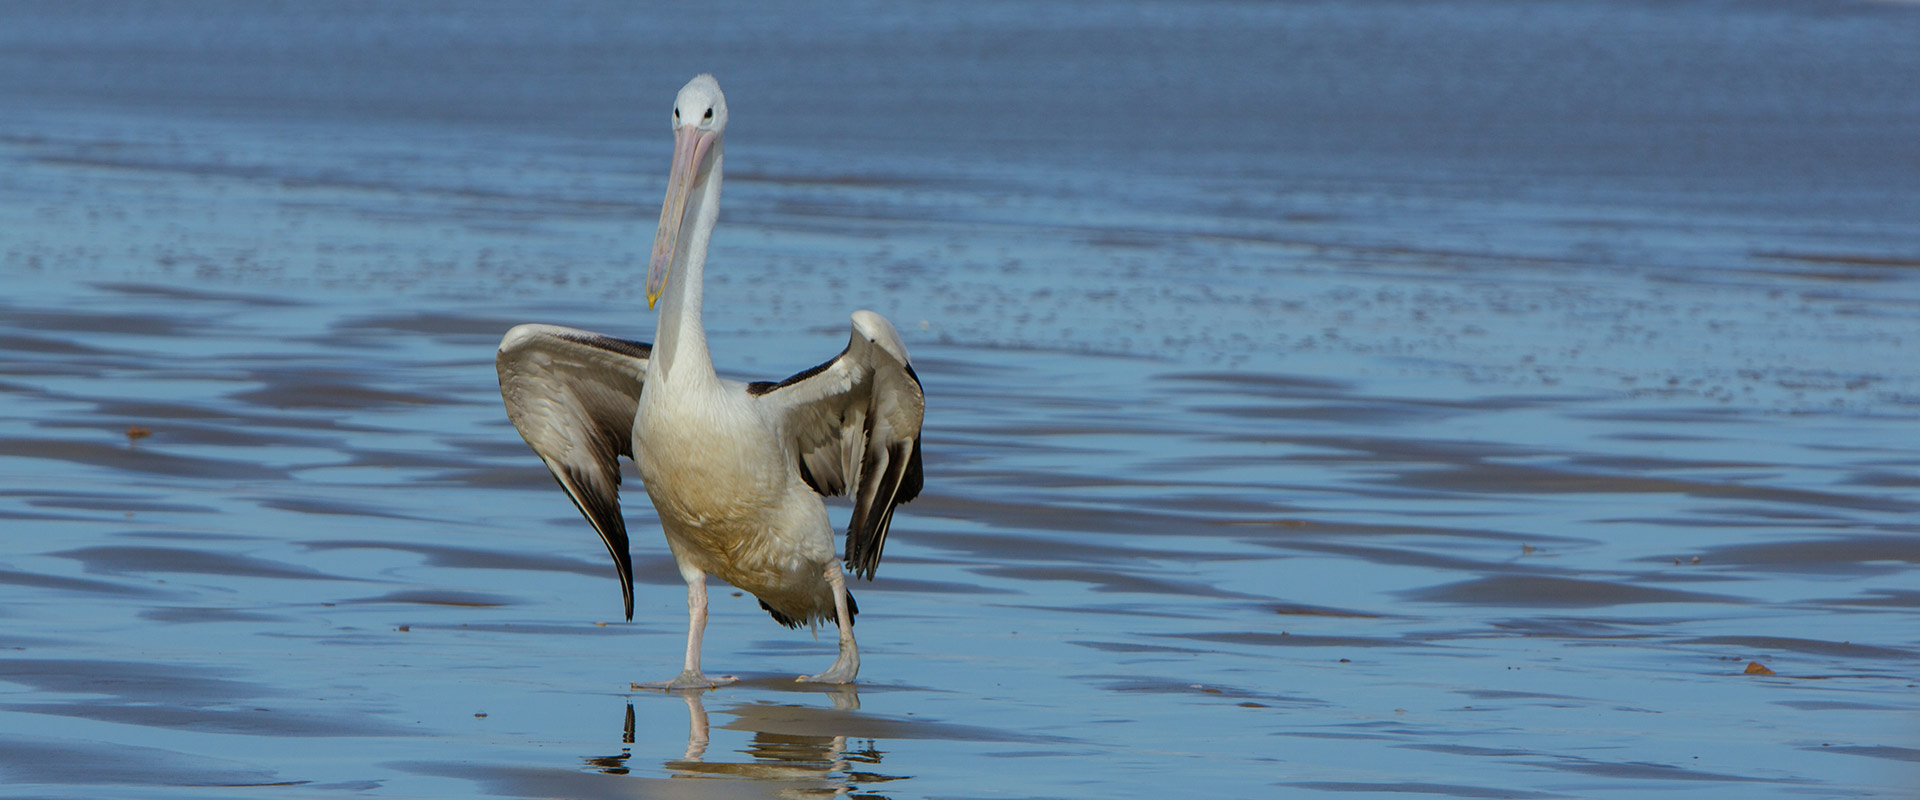 Pelican in Coorong National Park, Murray River, Lakes & Coorong